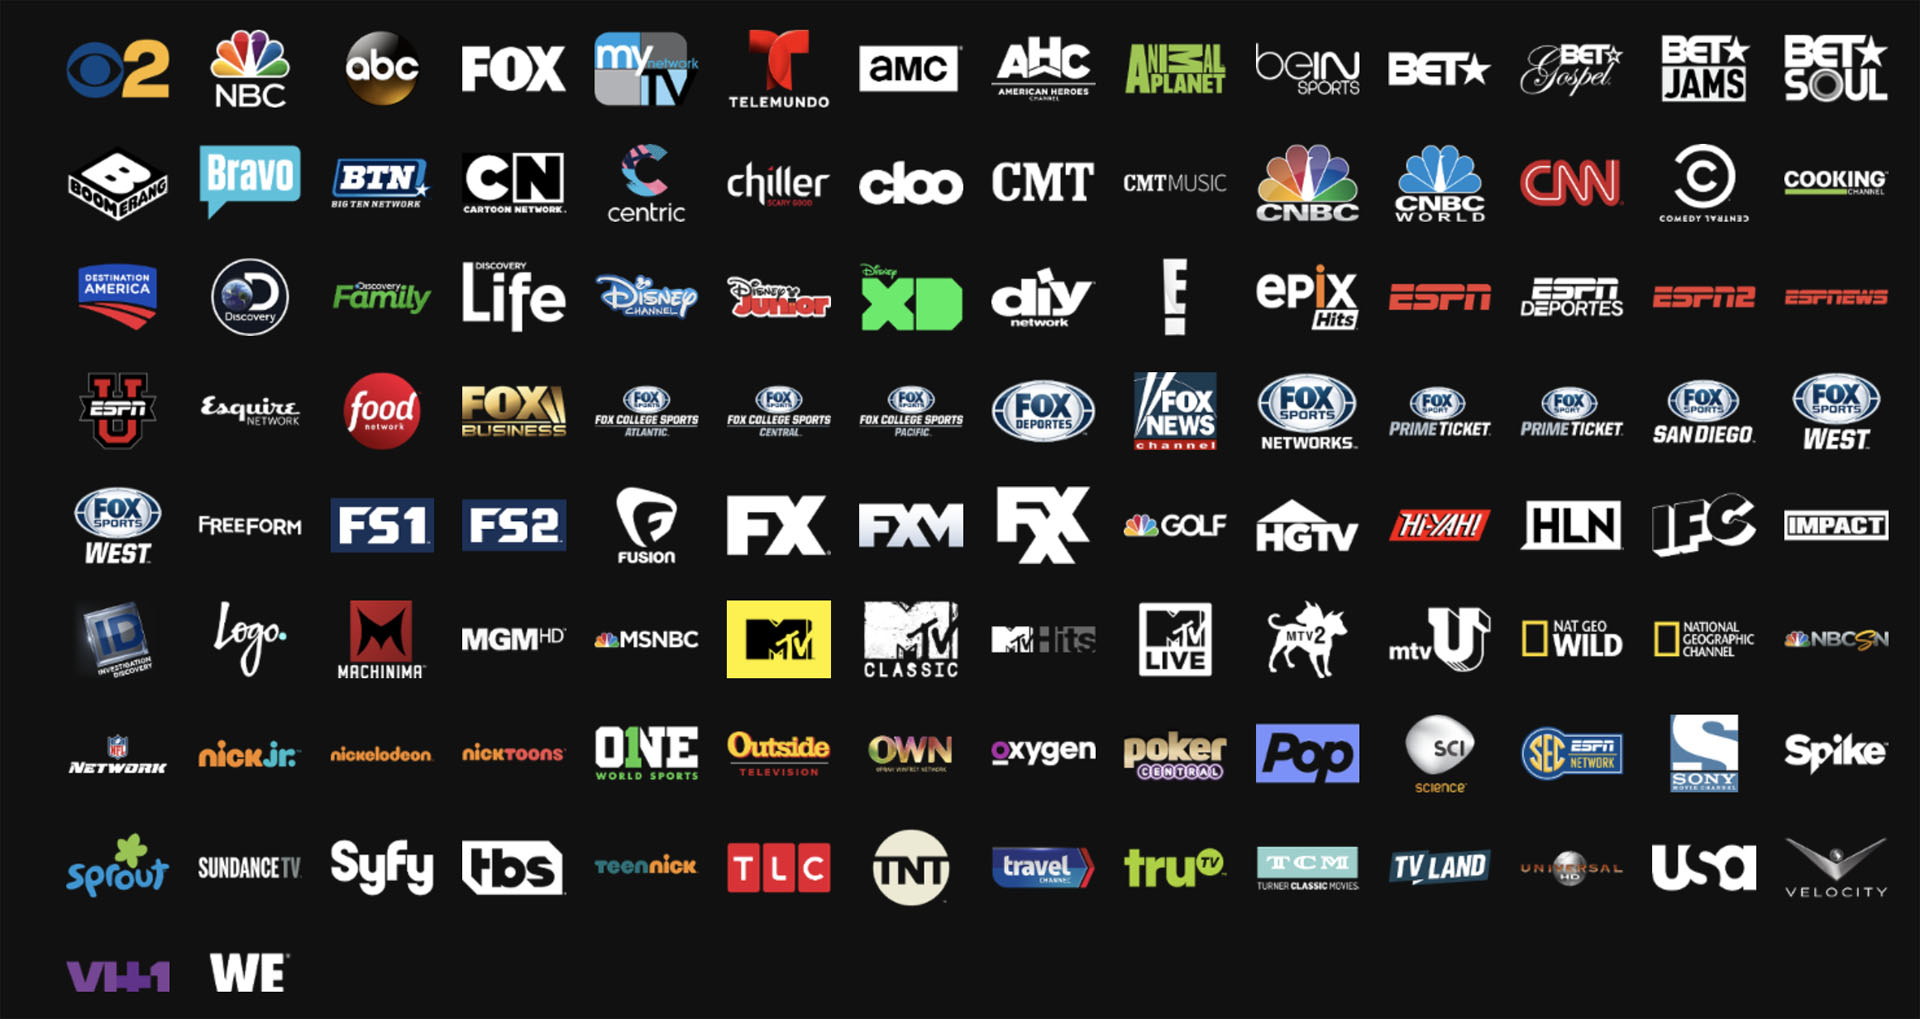 PlayStation Vue adds a ton more local channels from ABC, CBS, NBC, and Fox